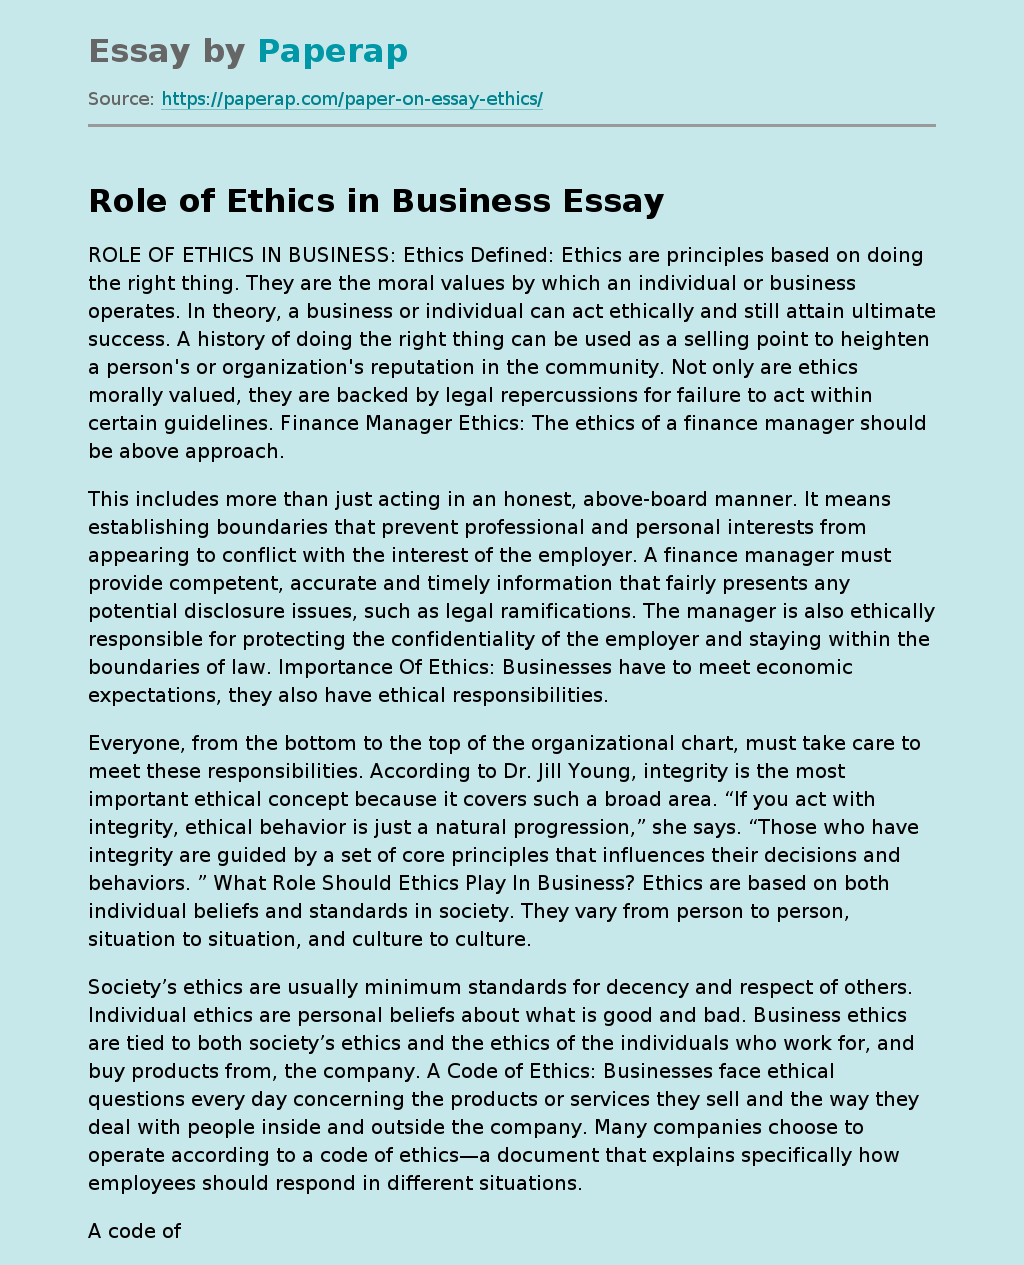 Role of Ethics in Business